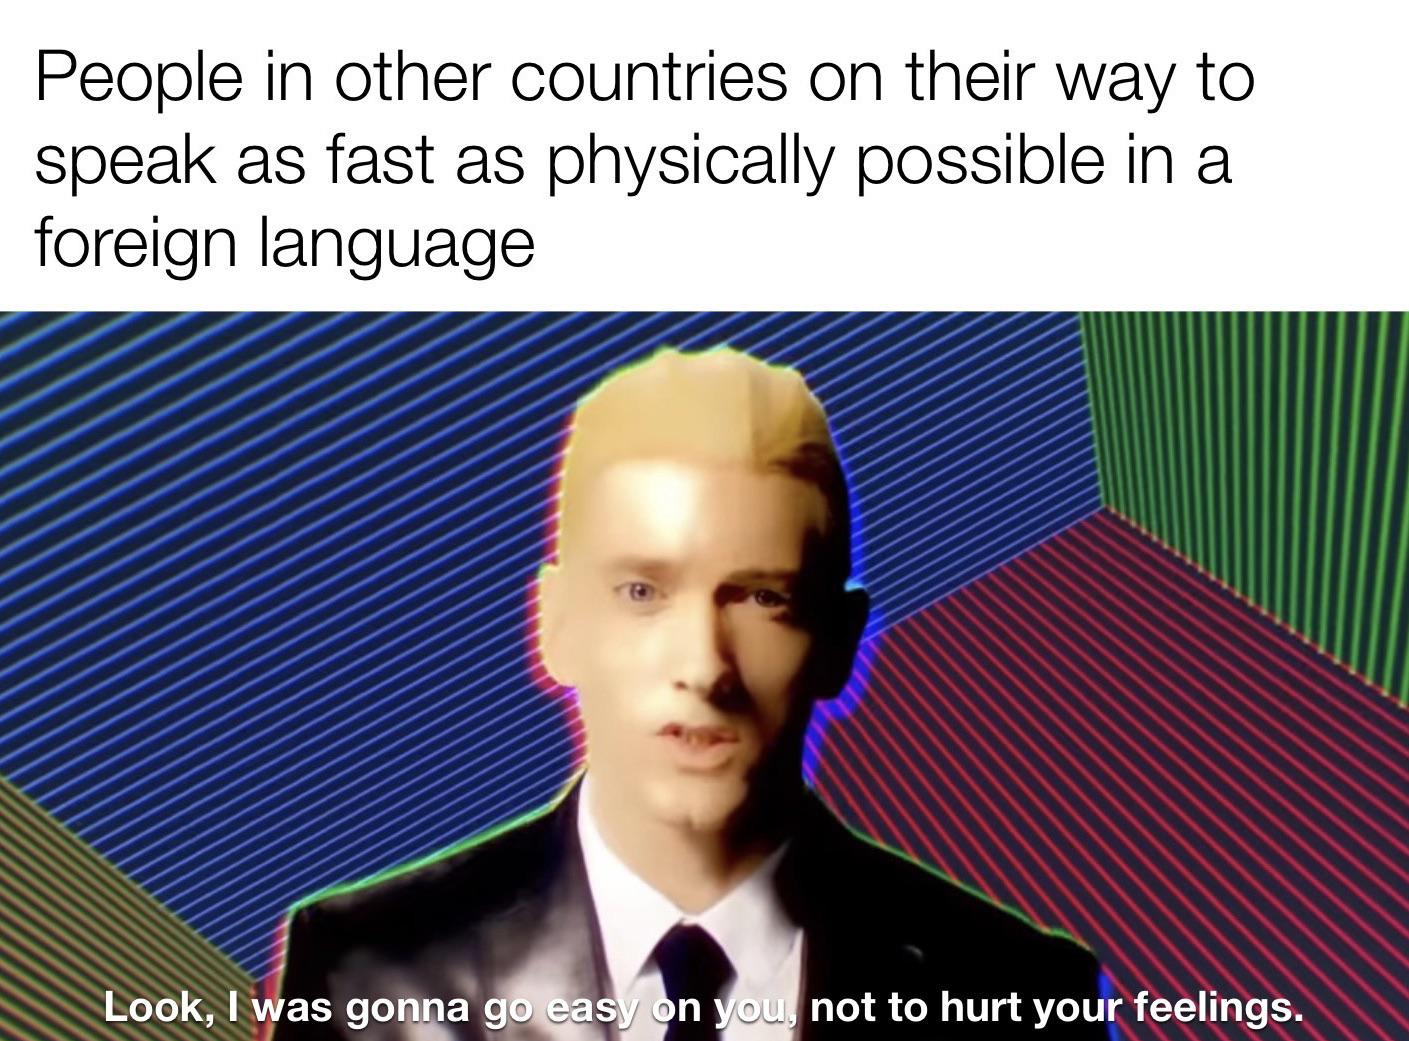 dank memes - conversation - People in other countries on their way to speak as fast as physically possible in a foreign language Look, I was gonna go easy on you, not to hurt your feelings.